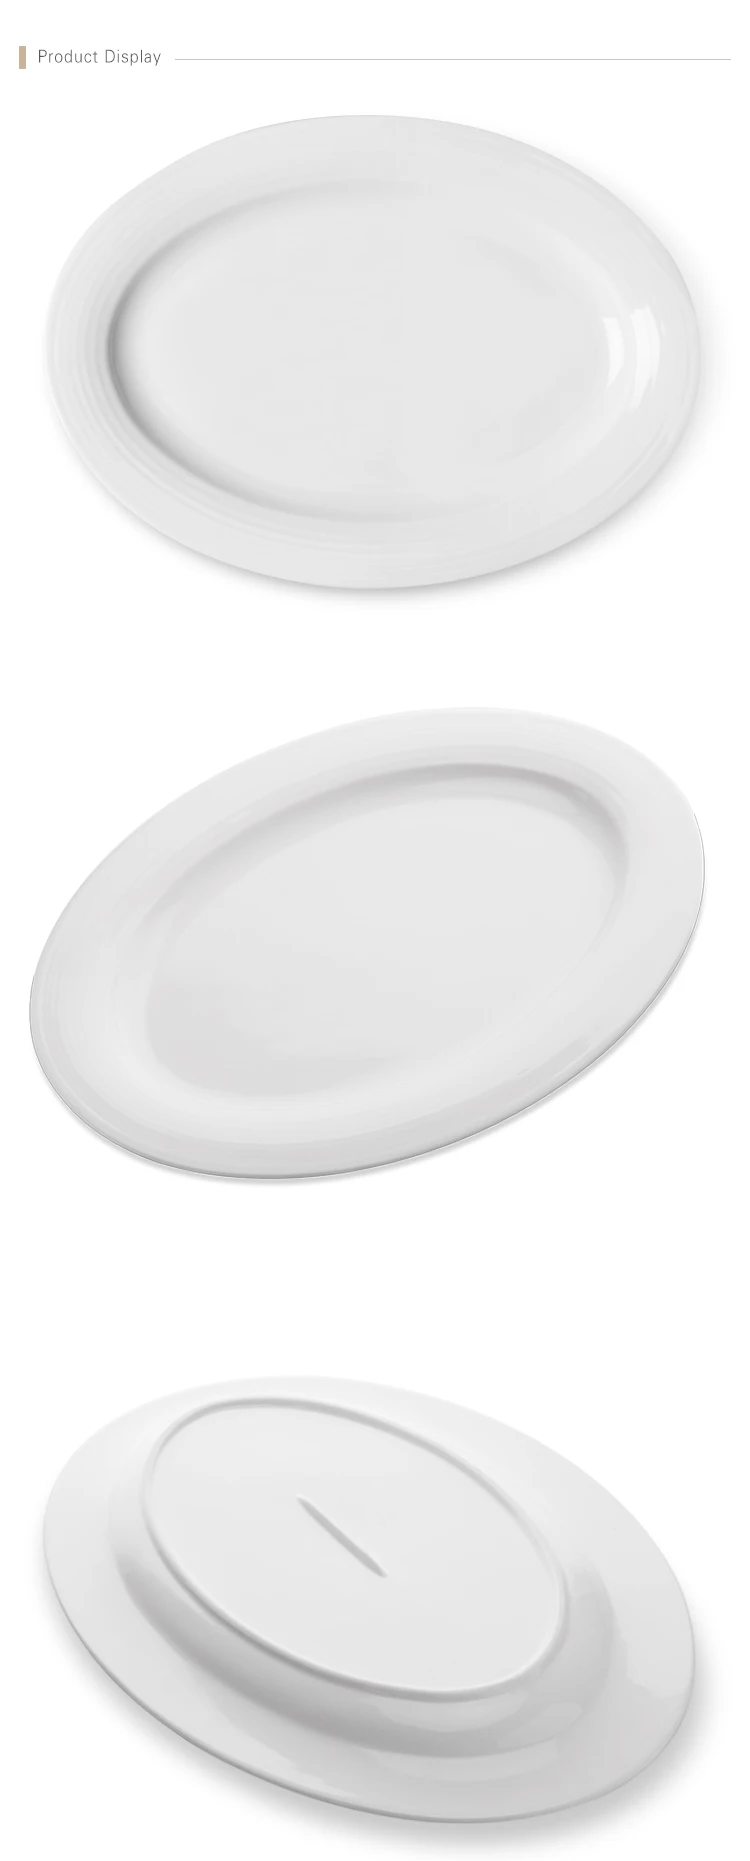 Unique Product Microwave Safe Hotel Restaurant Plates Mexican, Oval Shape Dish, Banquet Plate#